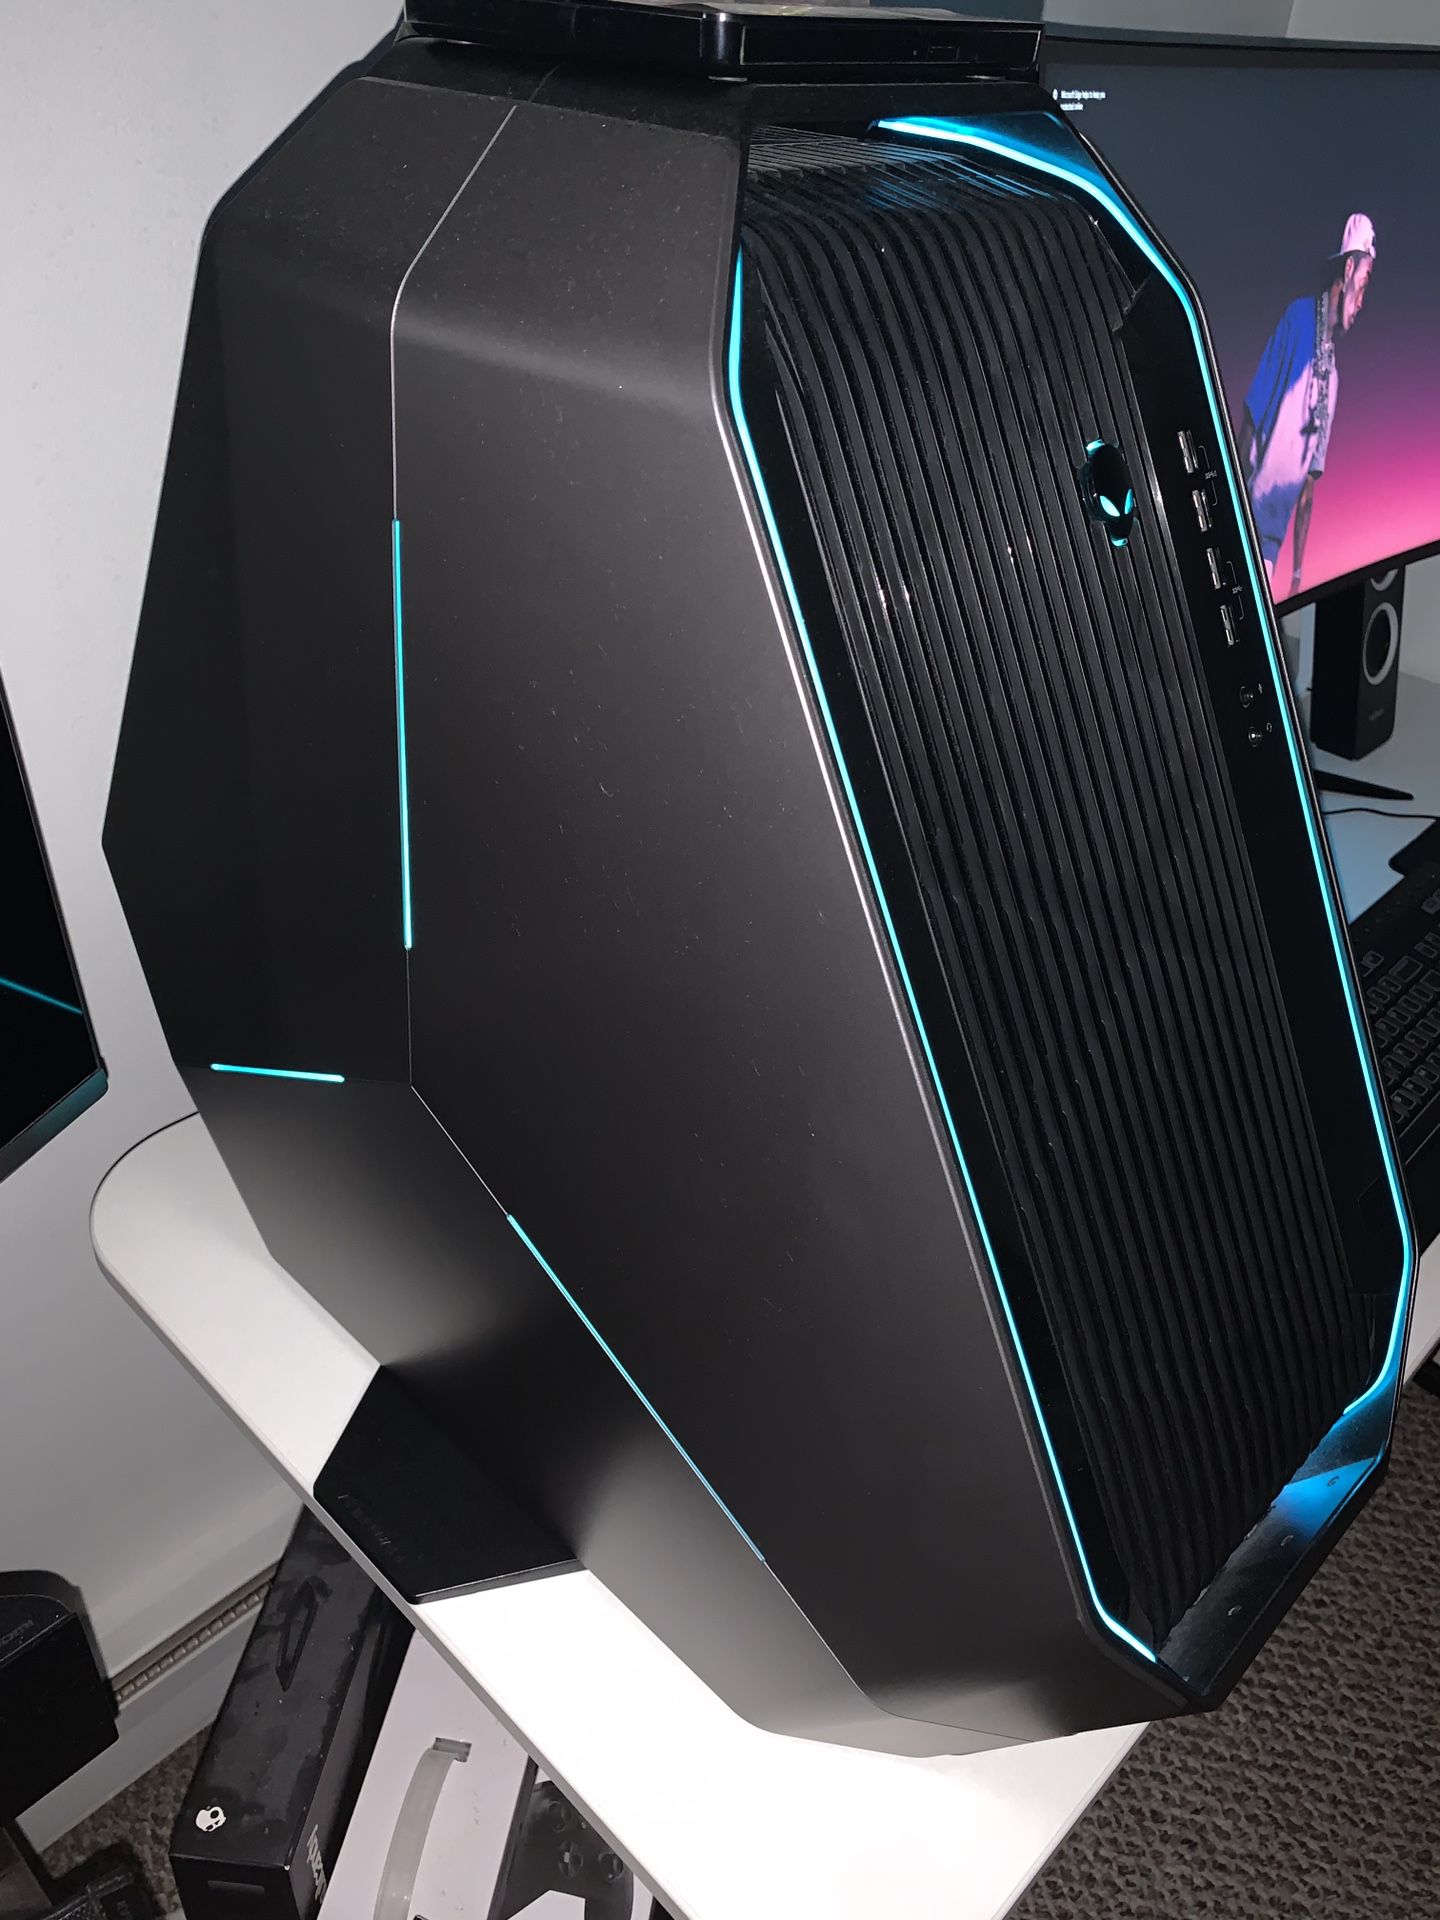 Alienware Area 51 with Curve Gaming Monitor